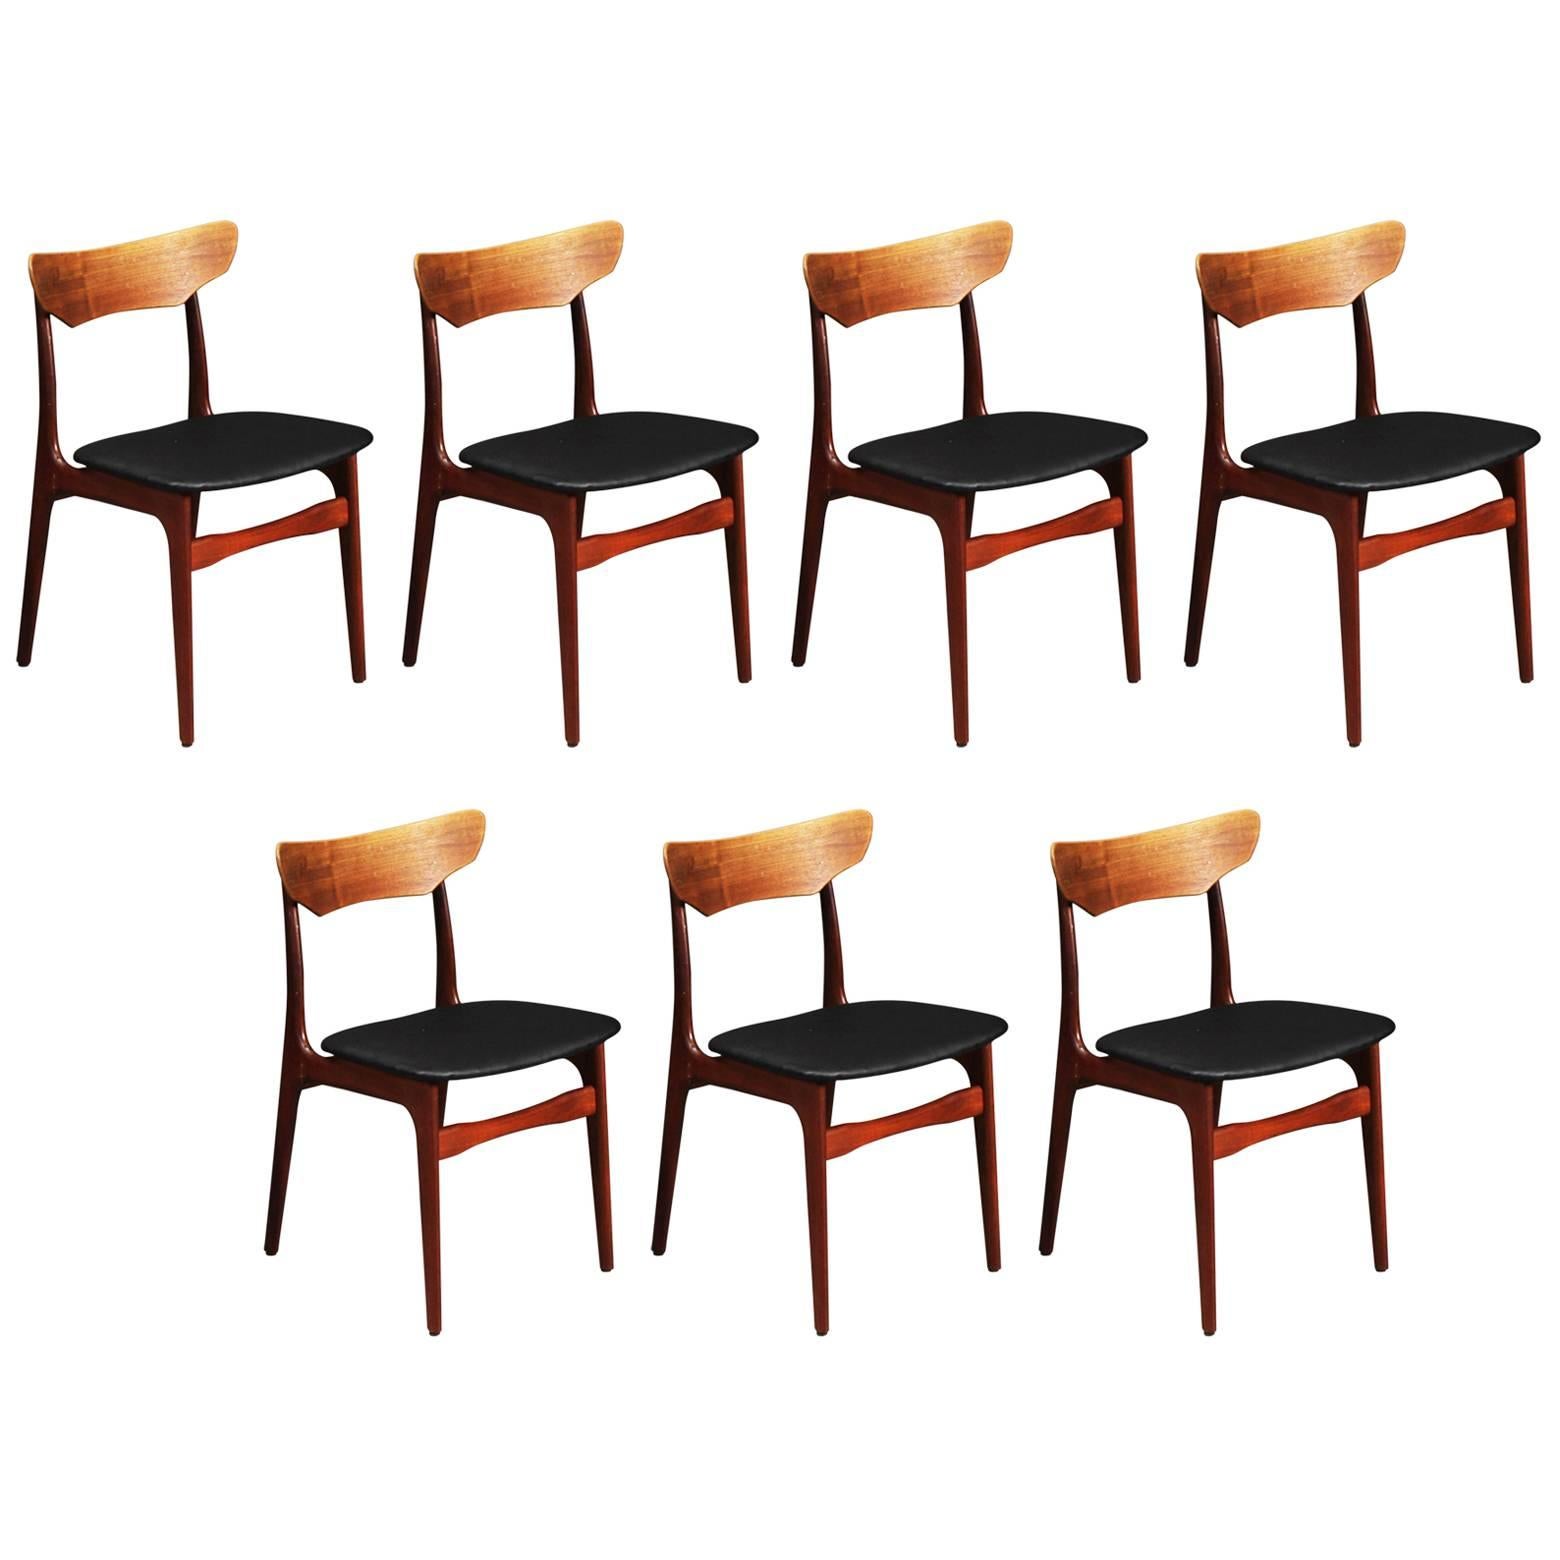 Up to Seven Schønning & Elgaard Dining Chairs For Sale